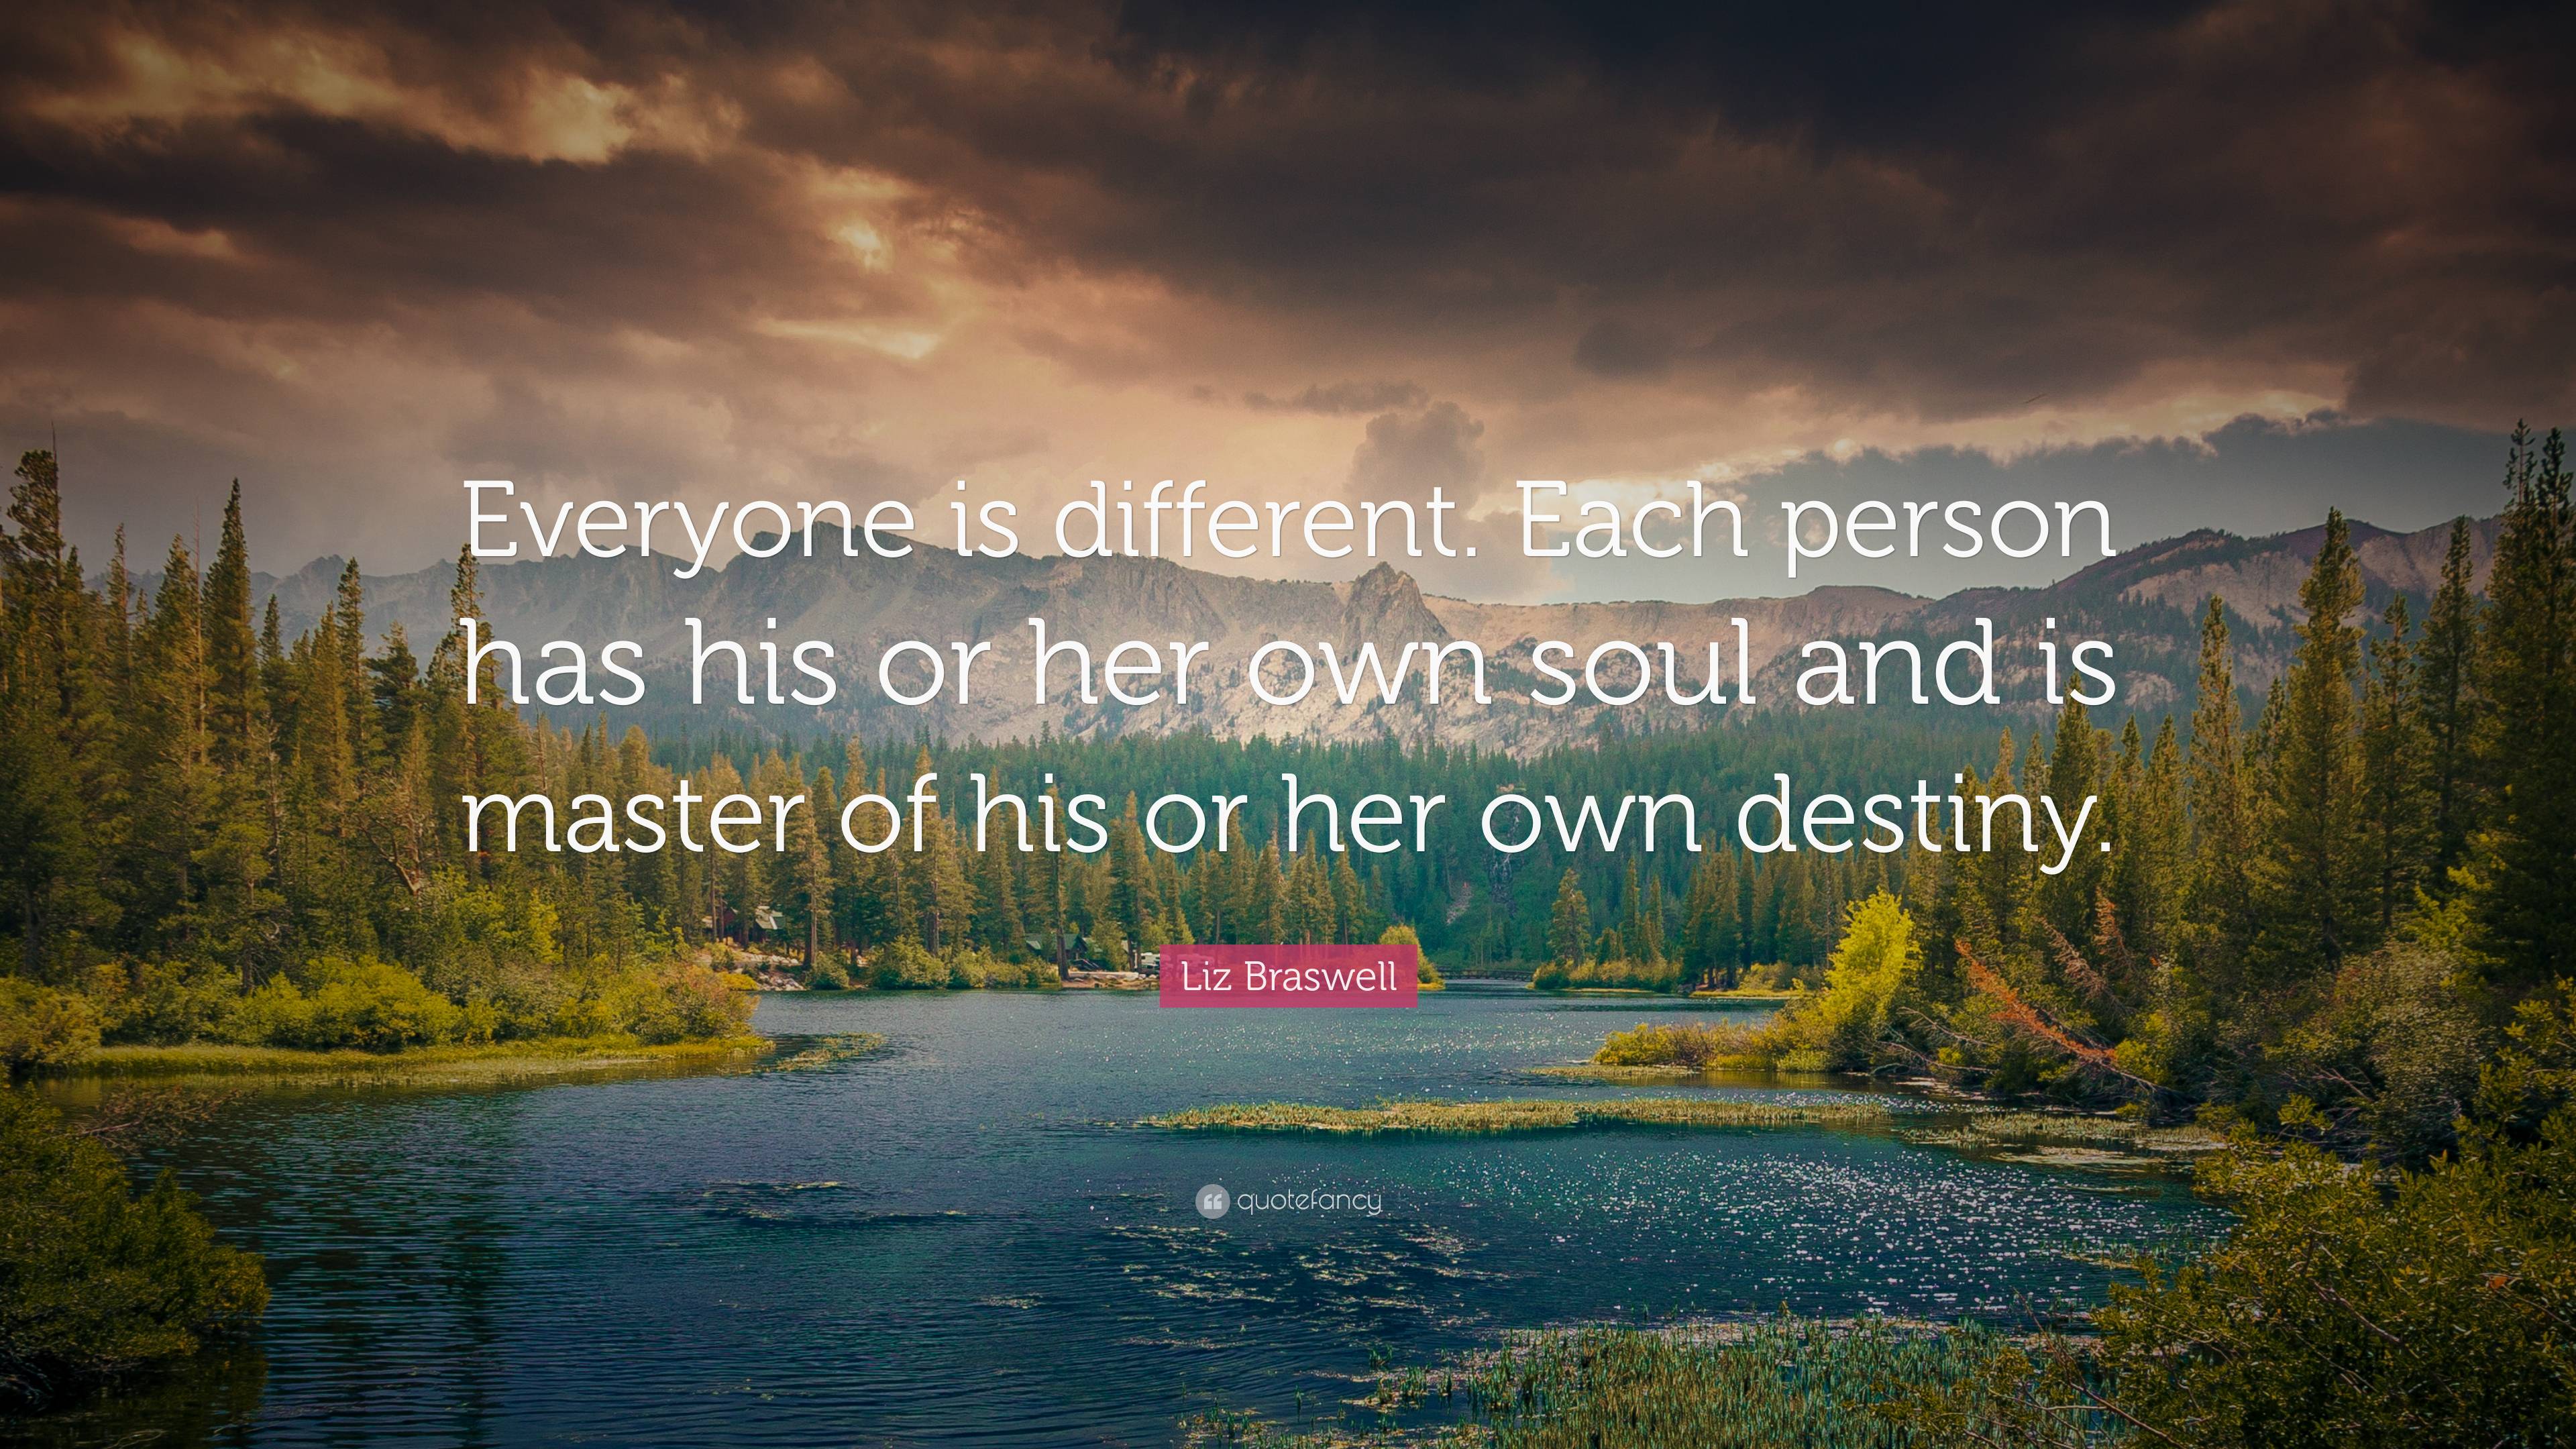 Liz Braswell Quote: “Everyone is different. Each person has his or her own  soul and is